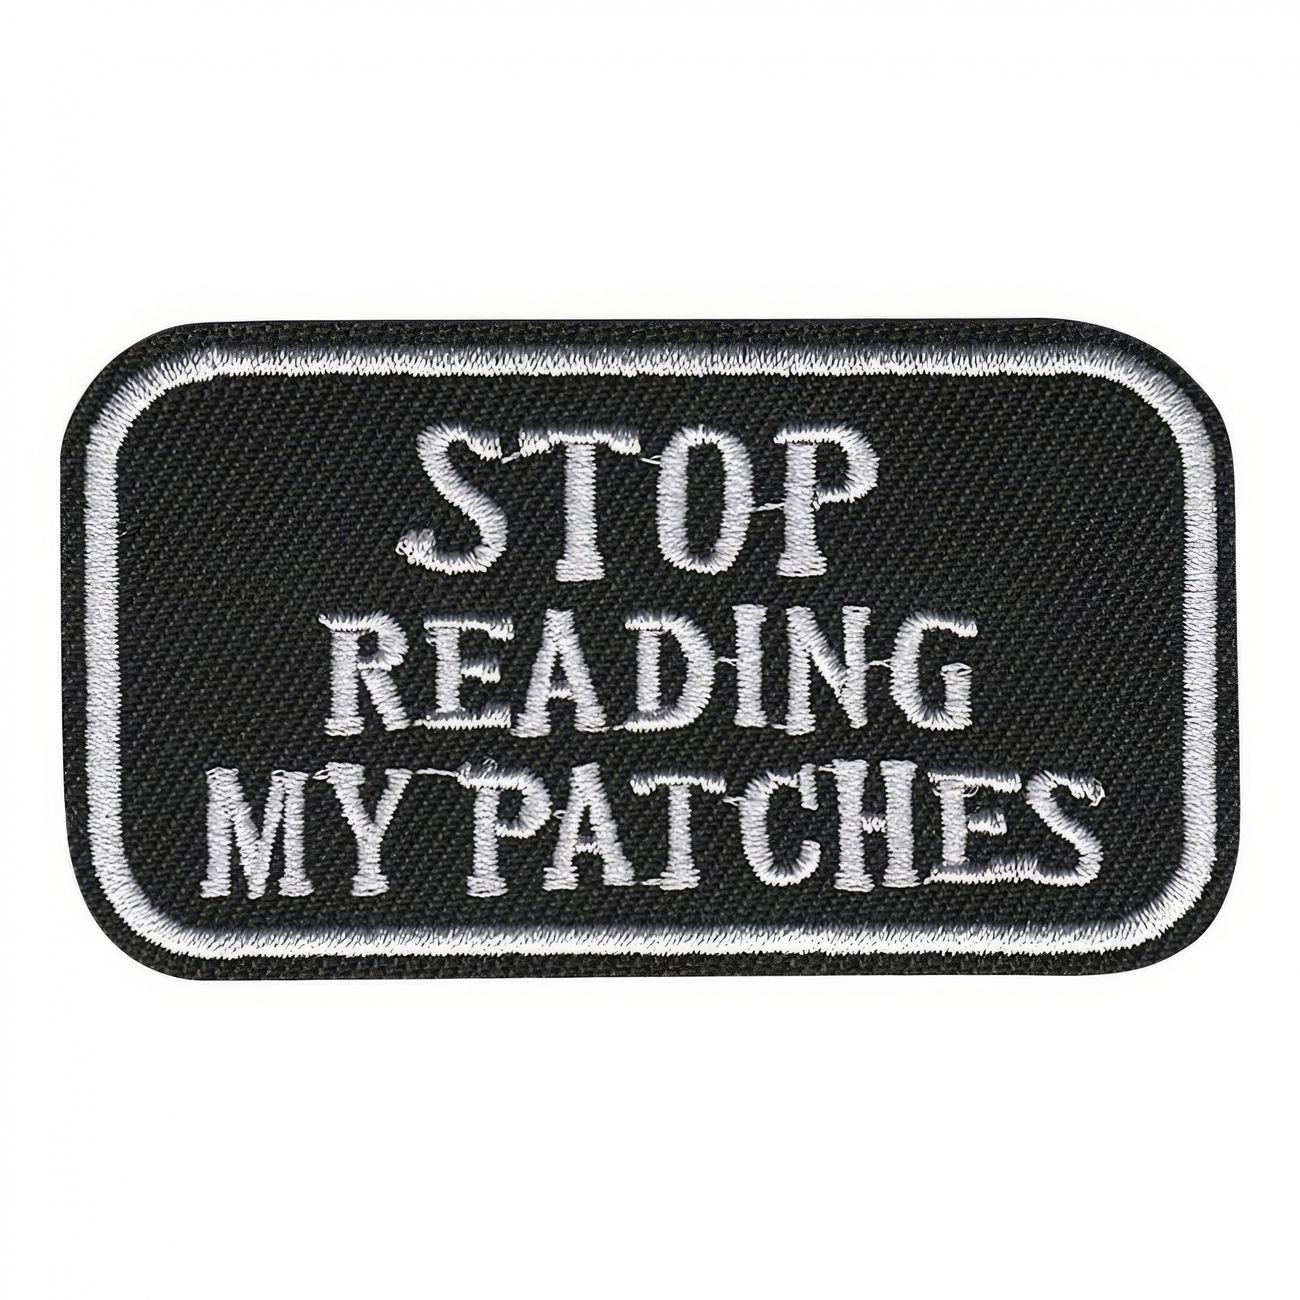 tygmarke-stop-reading-my-patches-a-94574-1